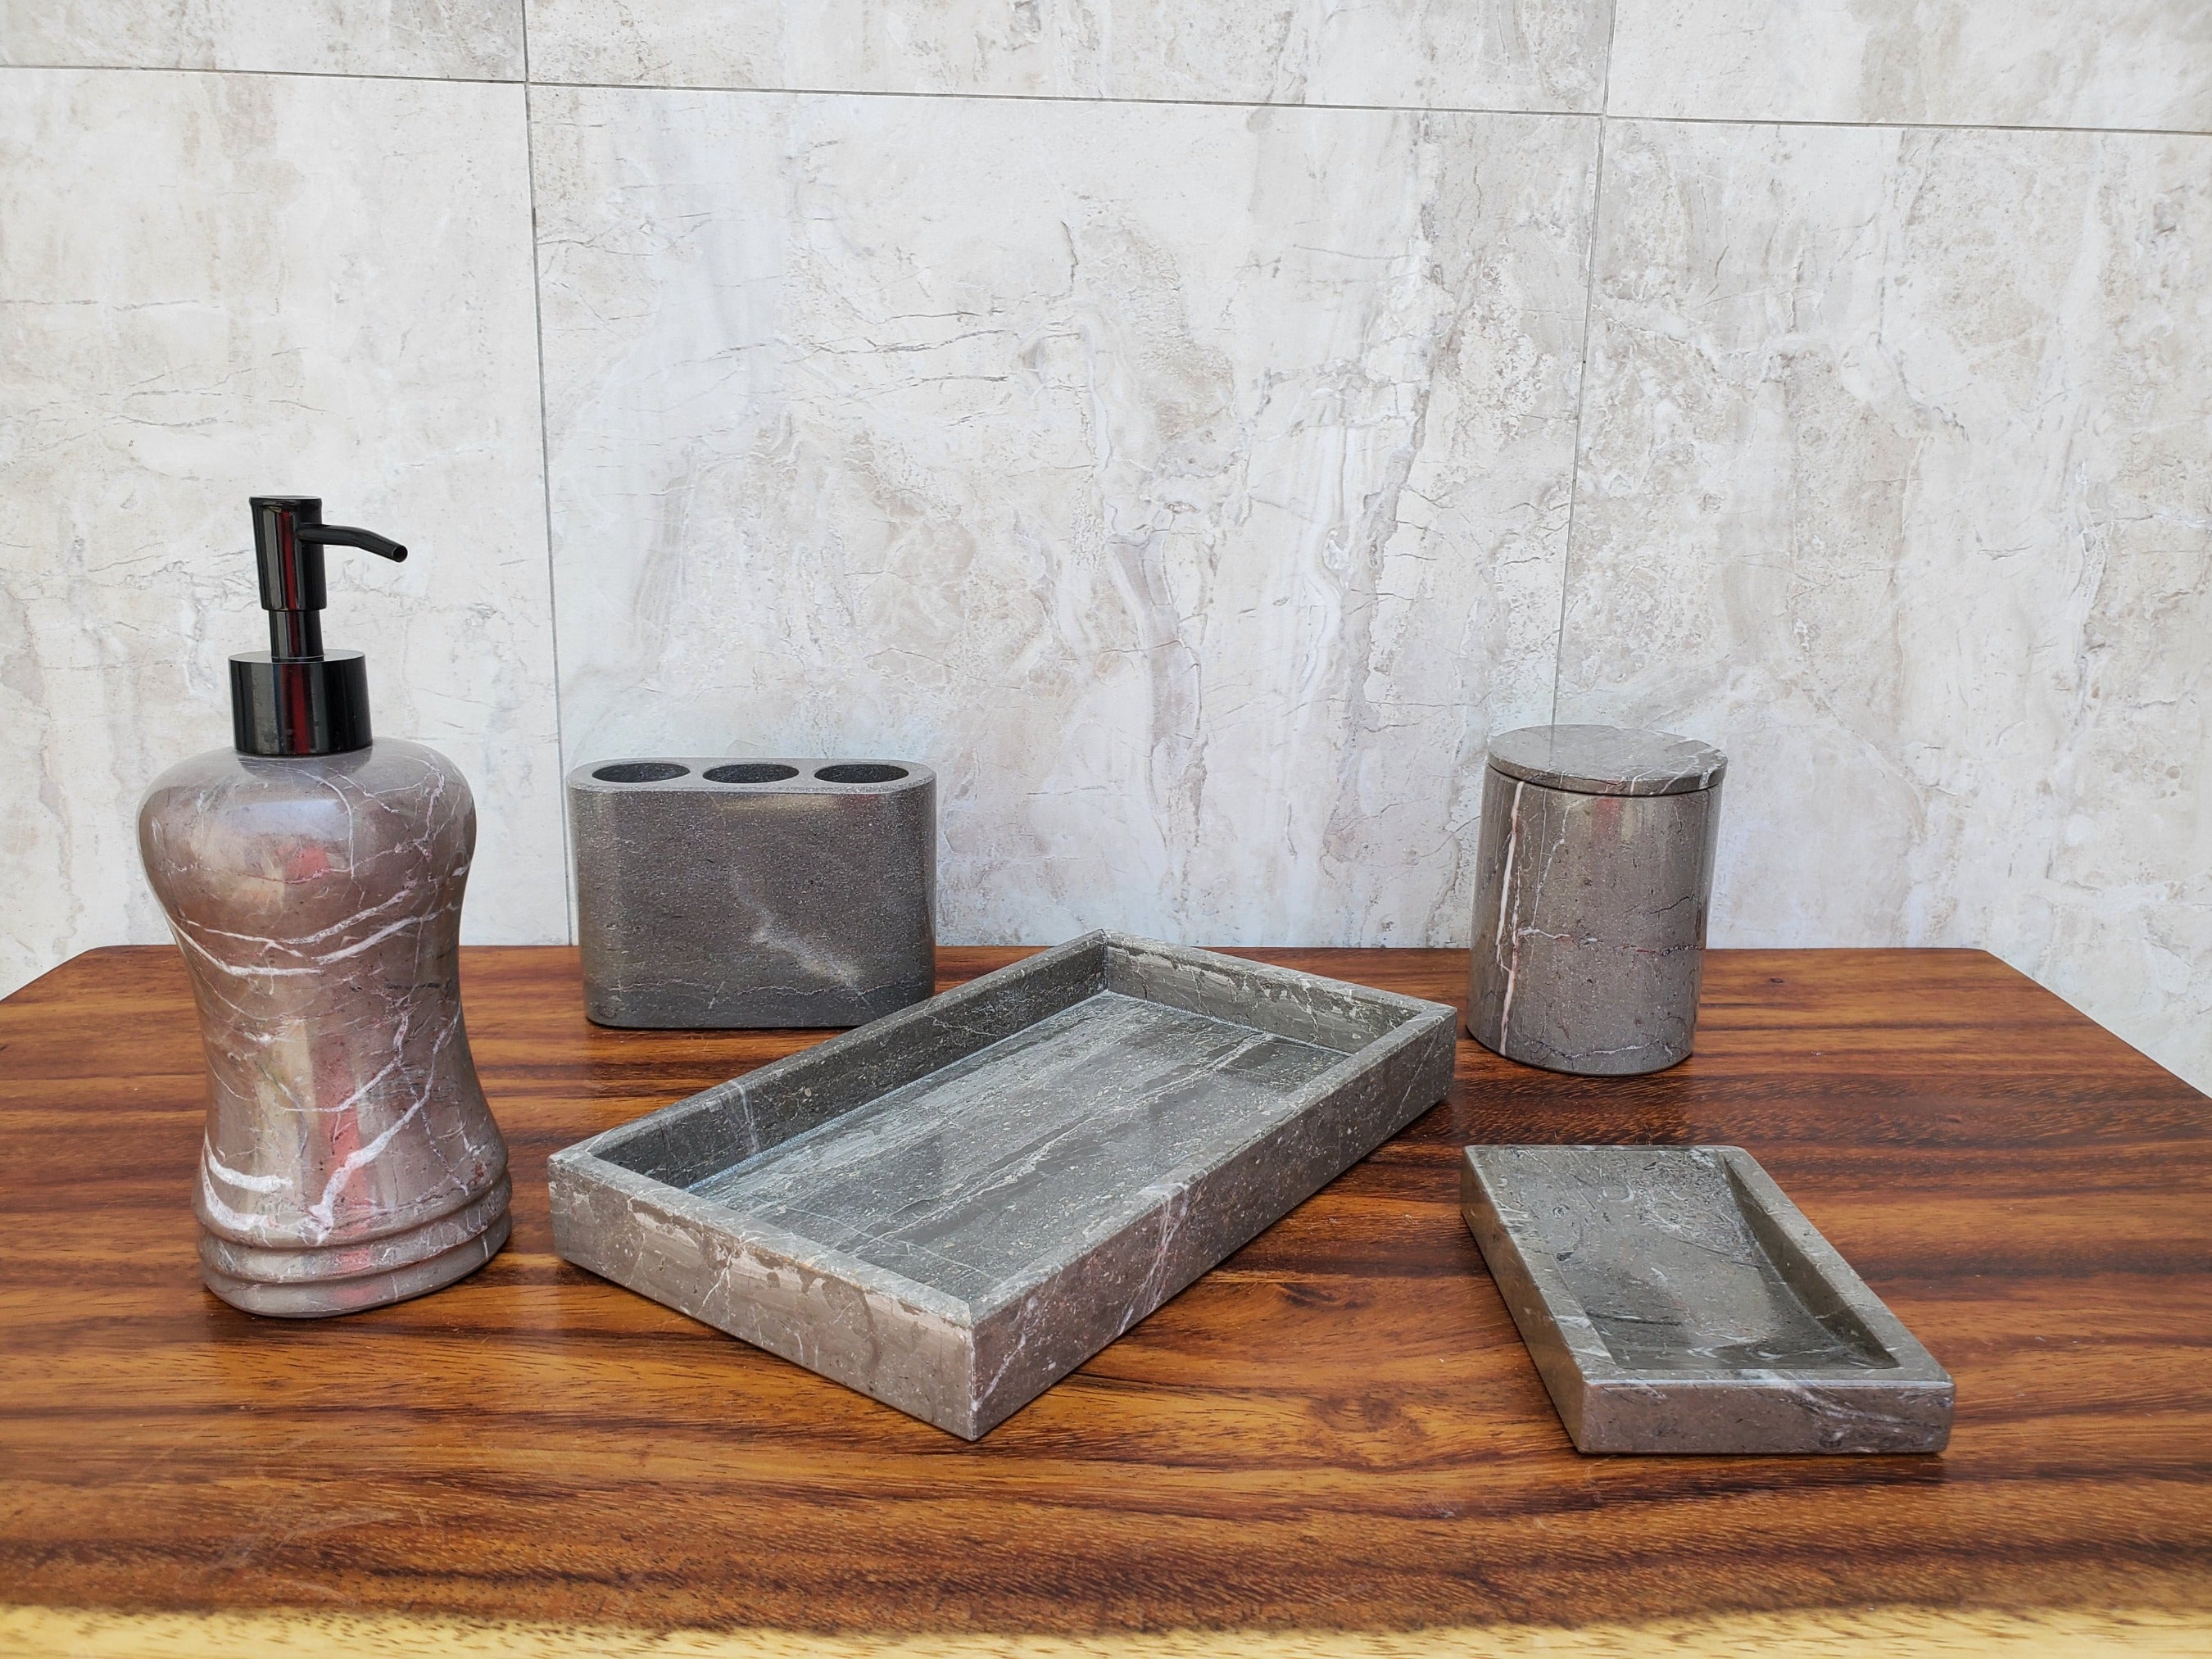 Gray and White Marble Bathroom Accessory Set. The set includes Lotion Dispenser, a Three Slot Toothbrush Holder, a Soap Dish, and a Tray. Handmade in Mexico. We package and ship from the USA. Buy now at www.felipeandgrace.com. 